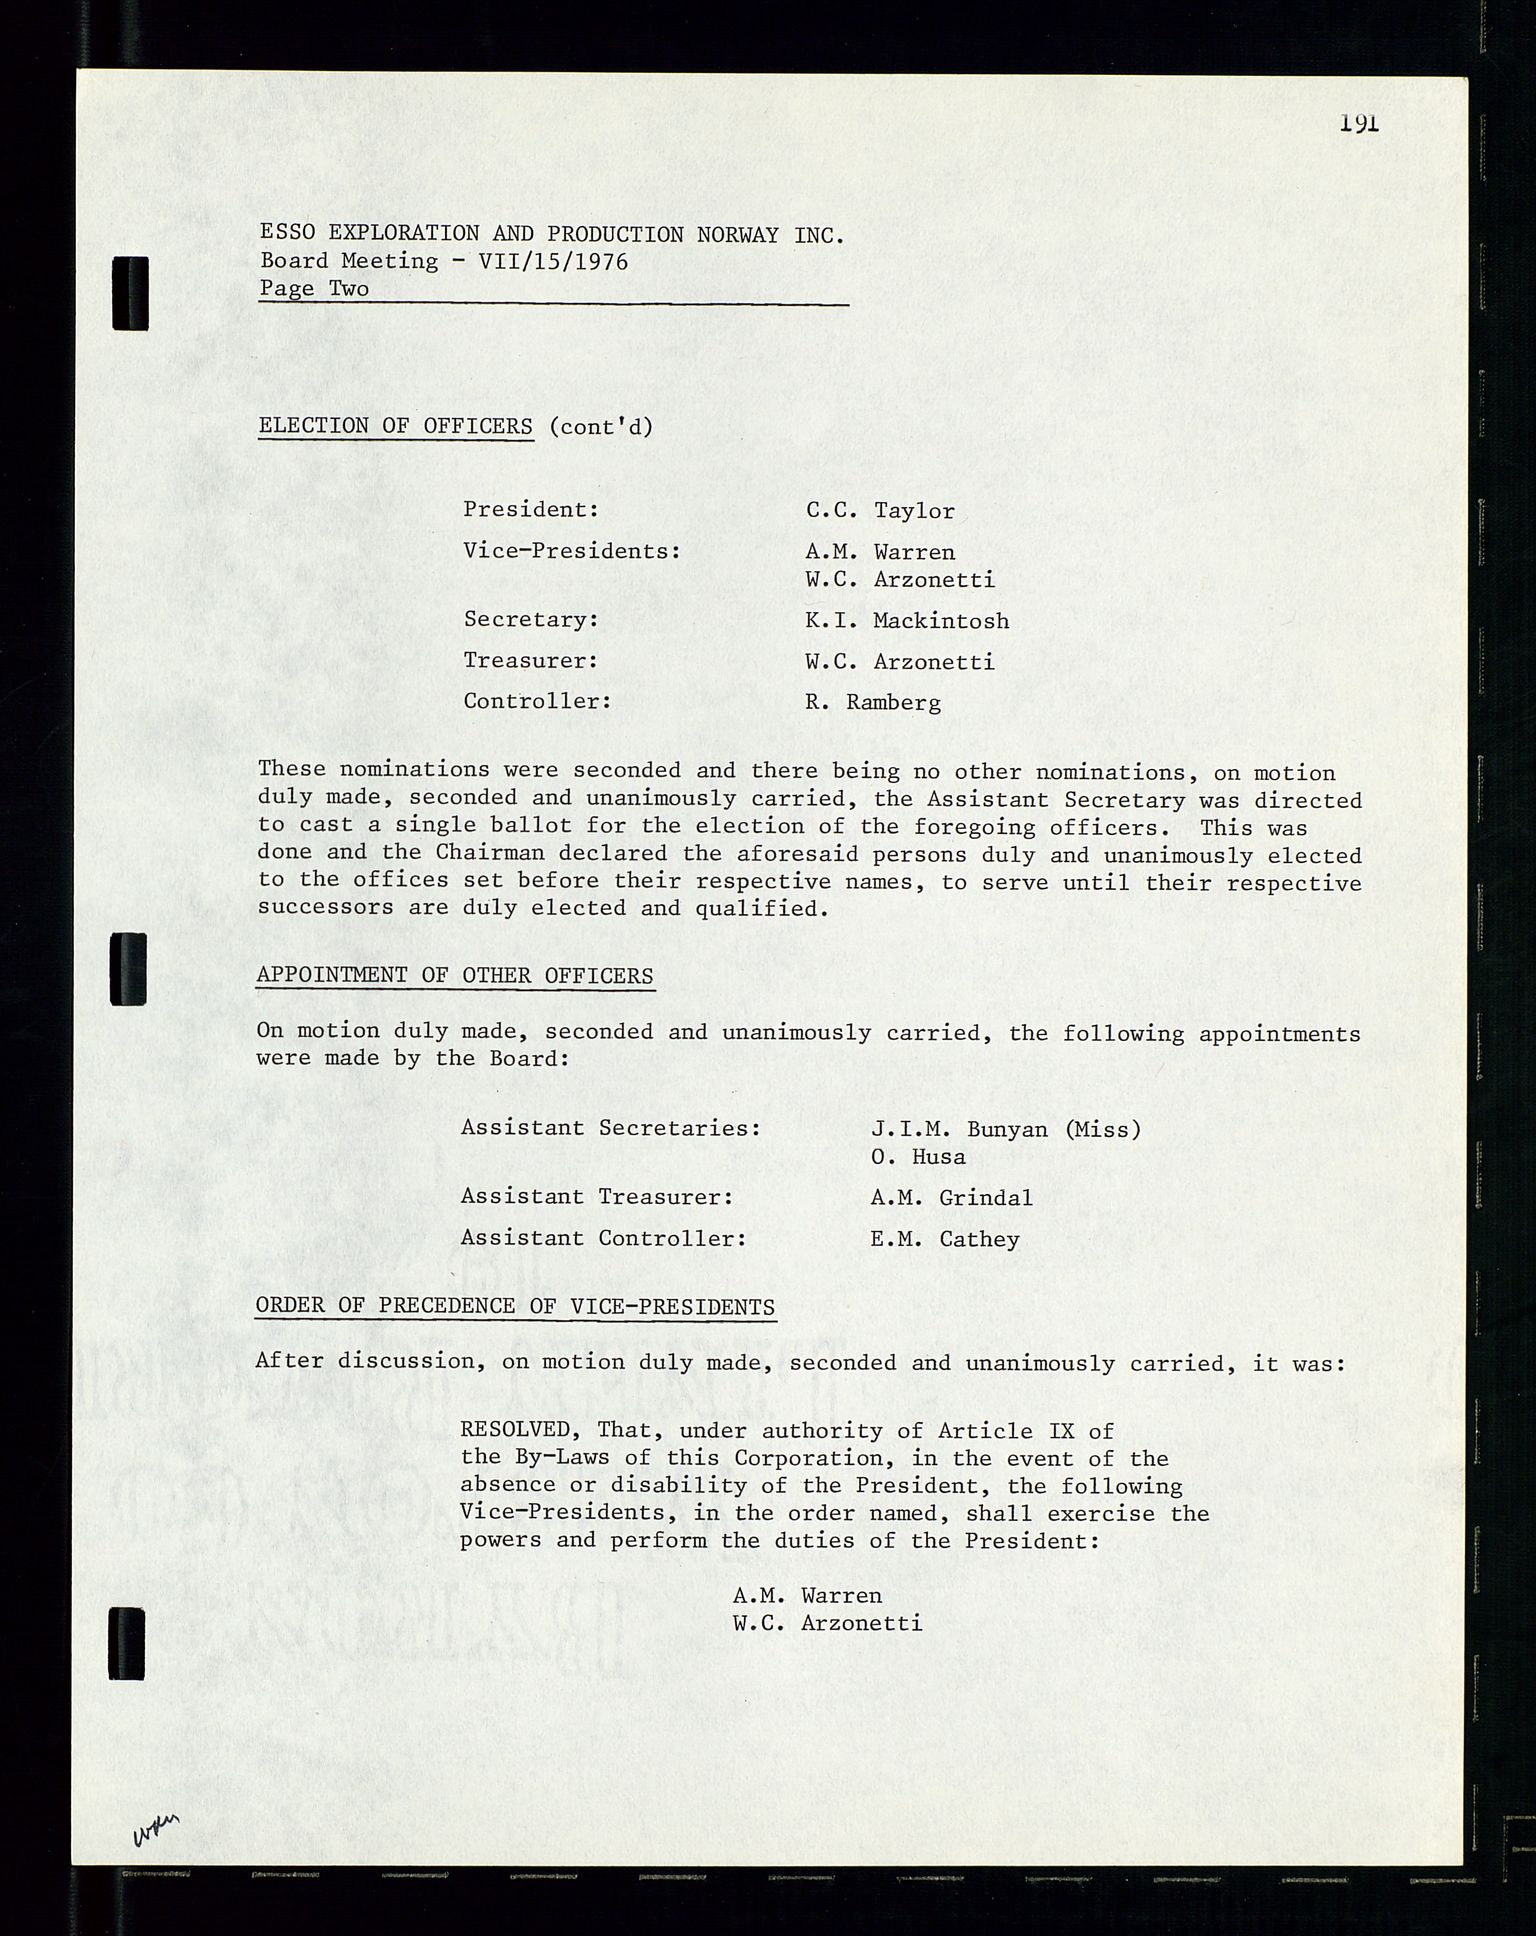 Pa 1512 - Esso Exploration and Production Norway Inc., SAST/A-101917/A/Aa/L0001/0002: Styredokumenter / Corporate records, Board meeting minutes, Agreements, Stocholder meetings, 1975-1979, p. 41